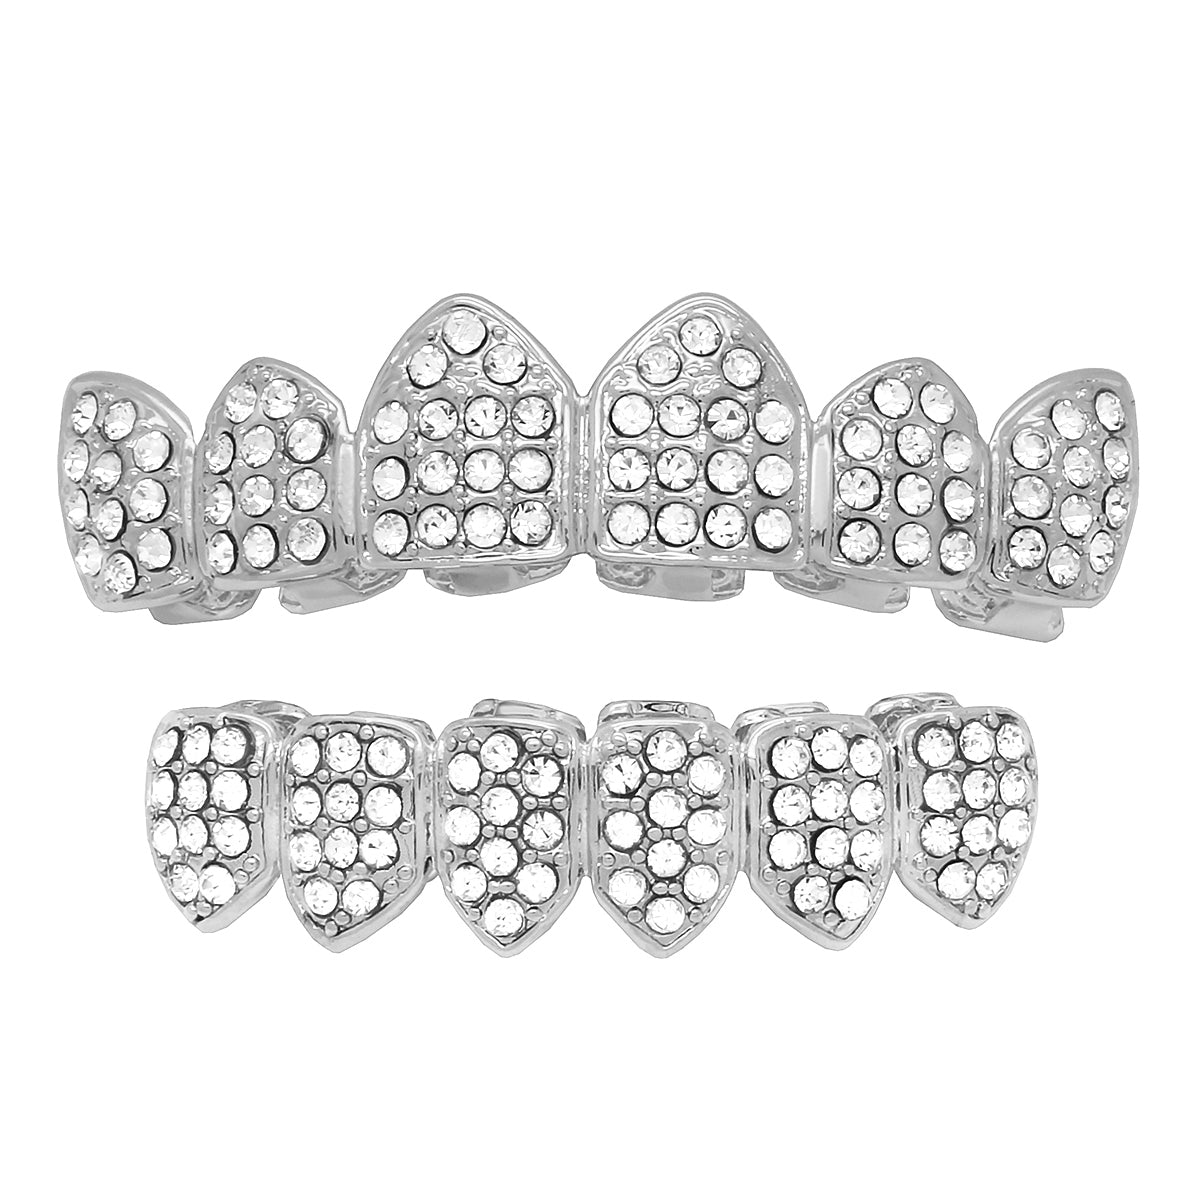 GRILLZ SET SILVER FULLY STONE